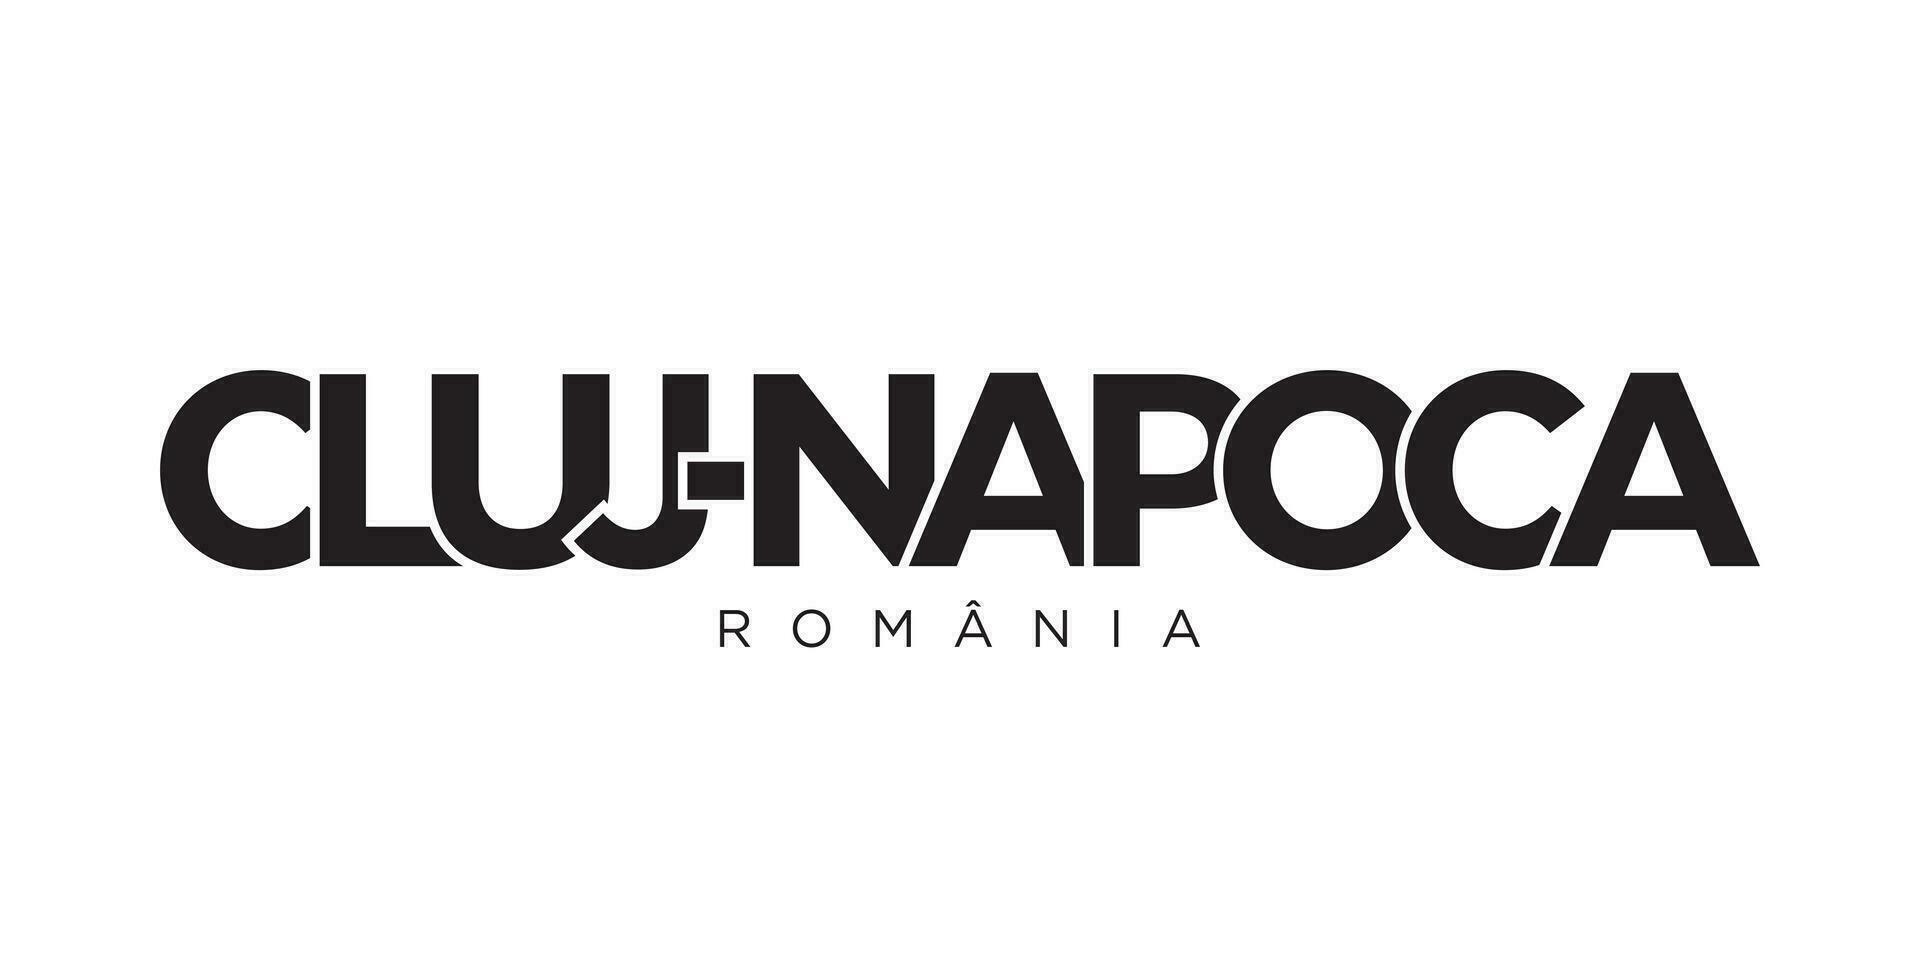 Cluj-Napoca in the Romania emblem. The design features a geometric style, vector illustration with bold typography in a modern font. The graphic slogan lettering.